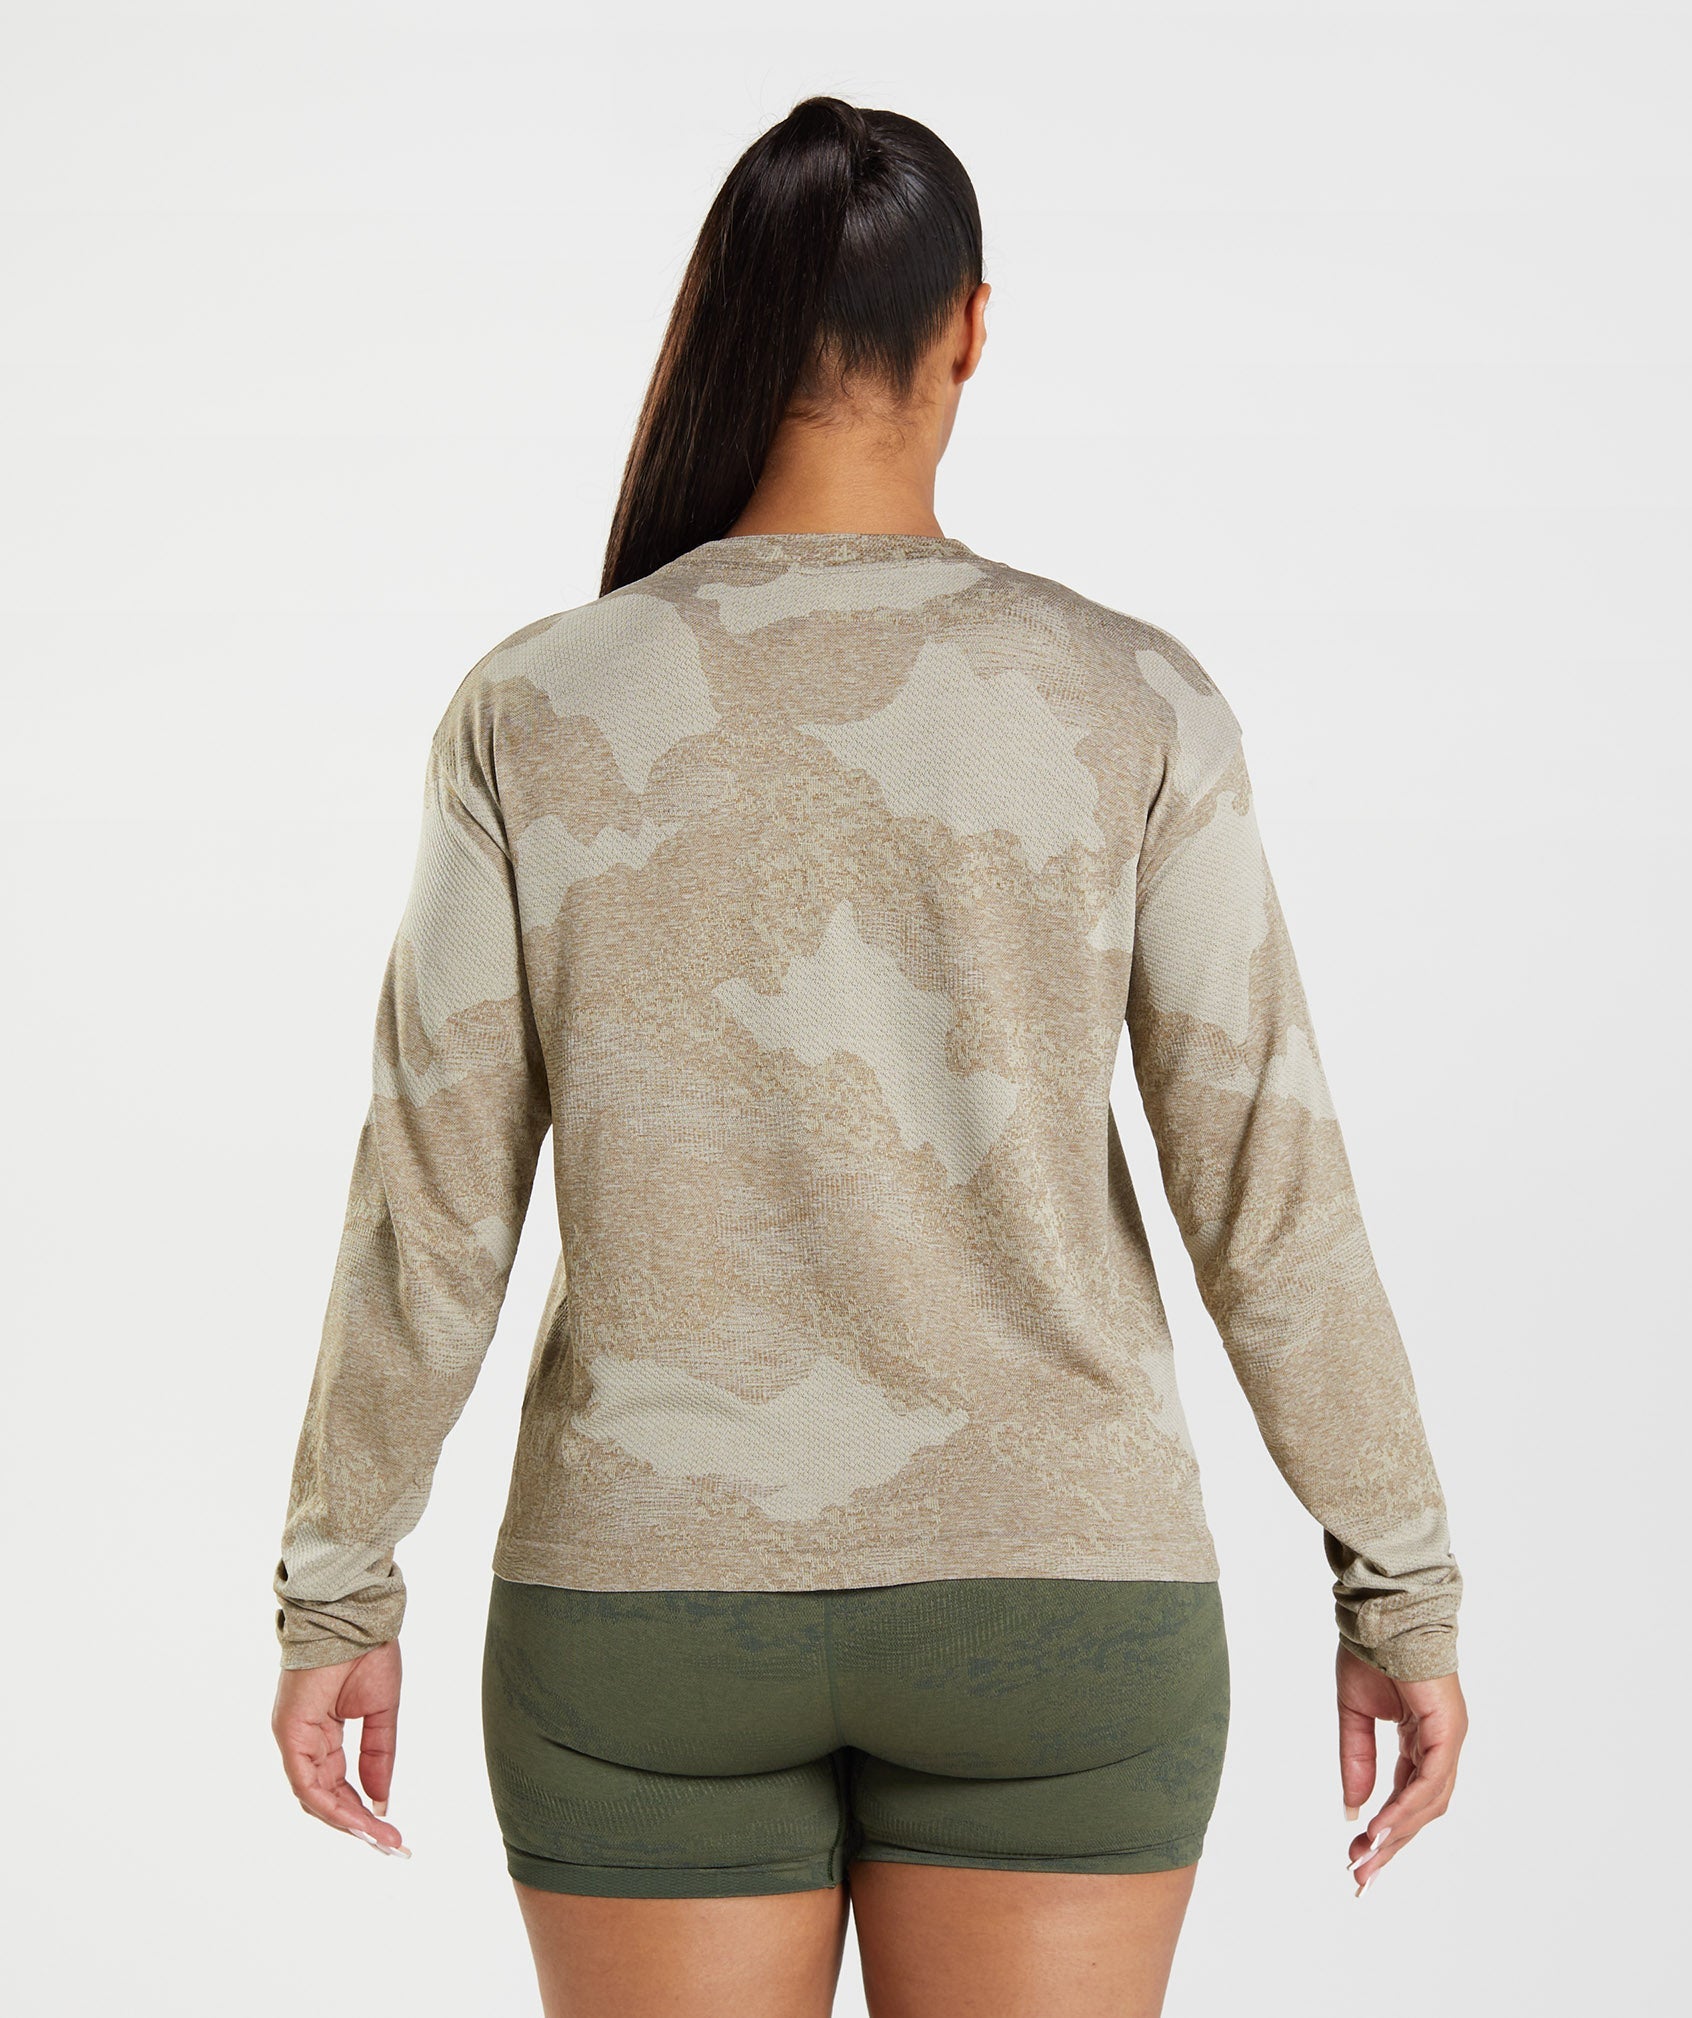 Adapt Camo Seamless Long Sleeve Top in Pebble Grey/Soul Brown - view 2